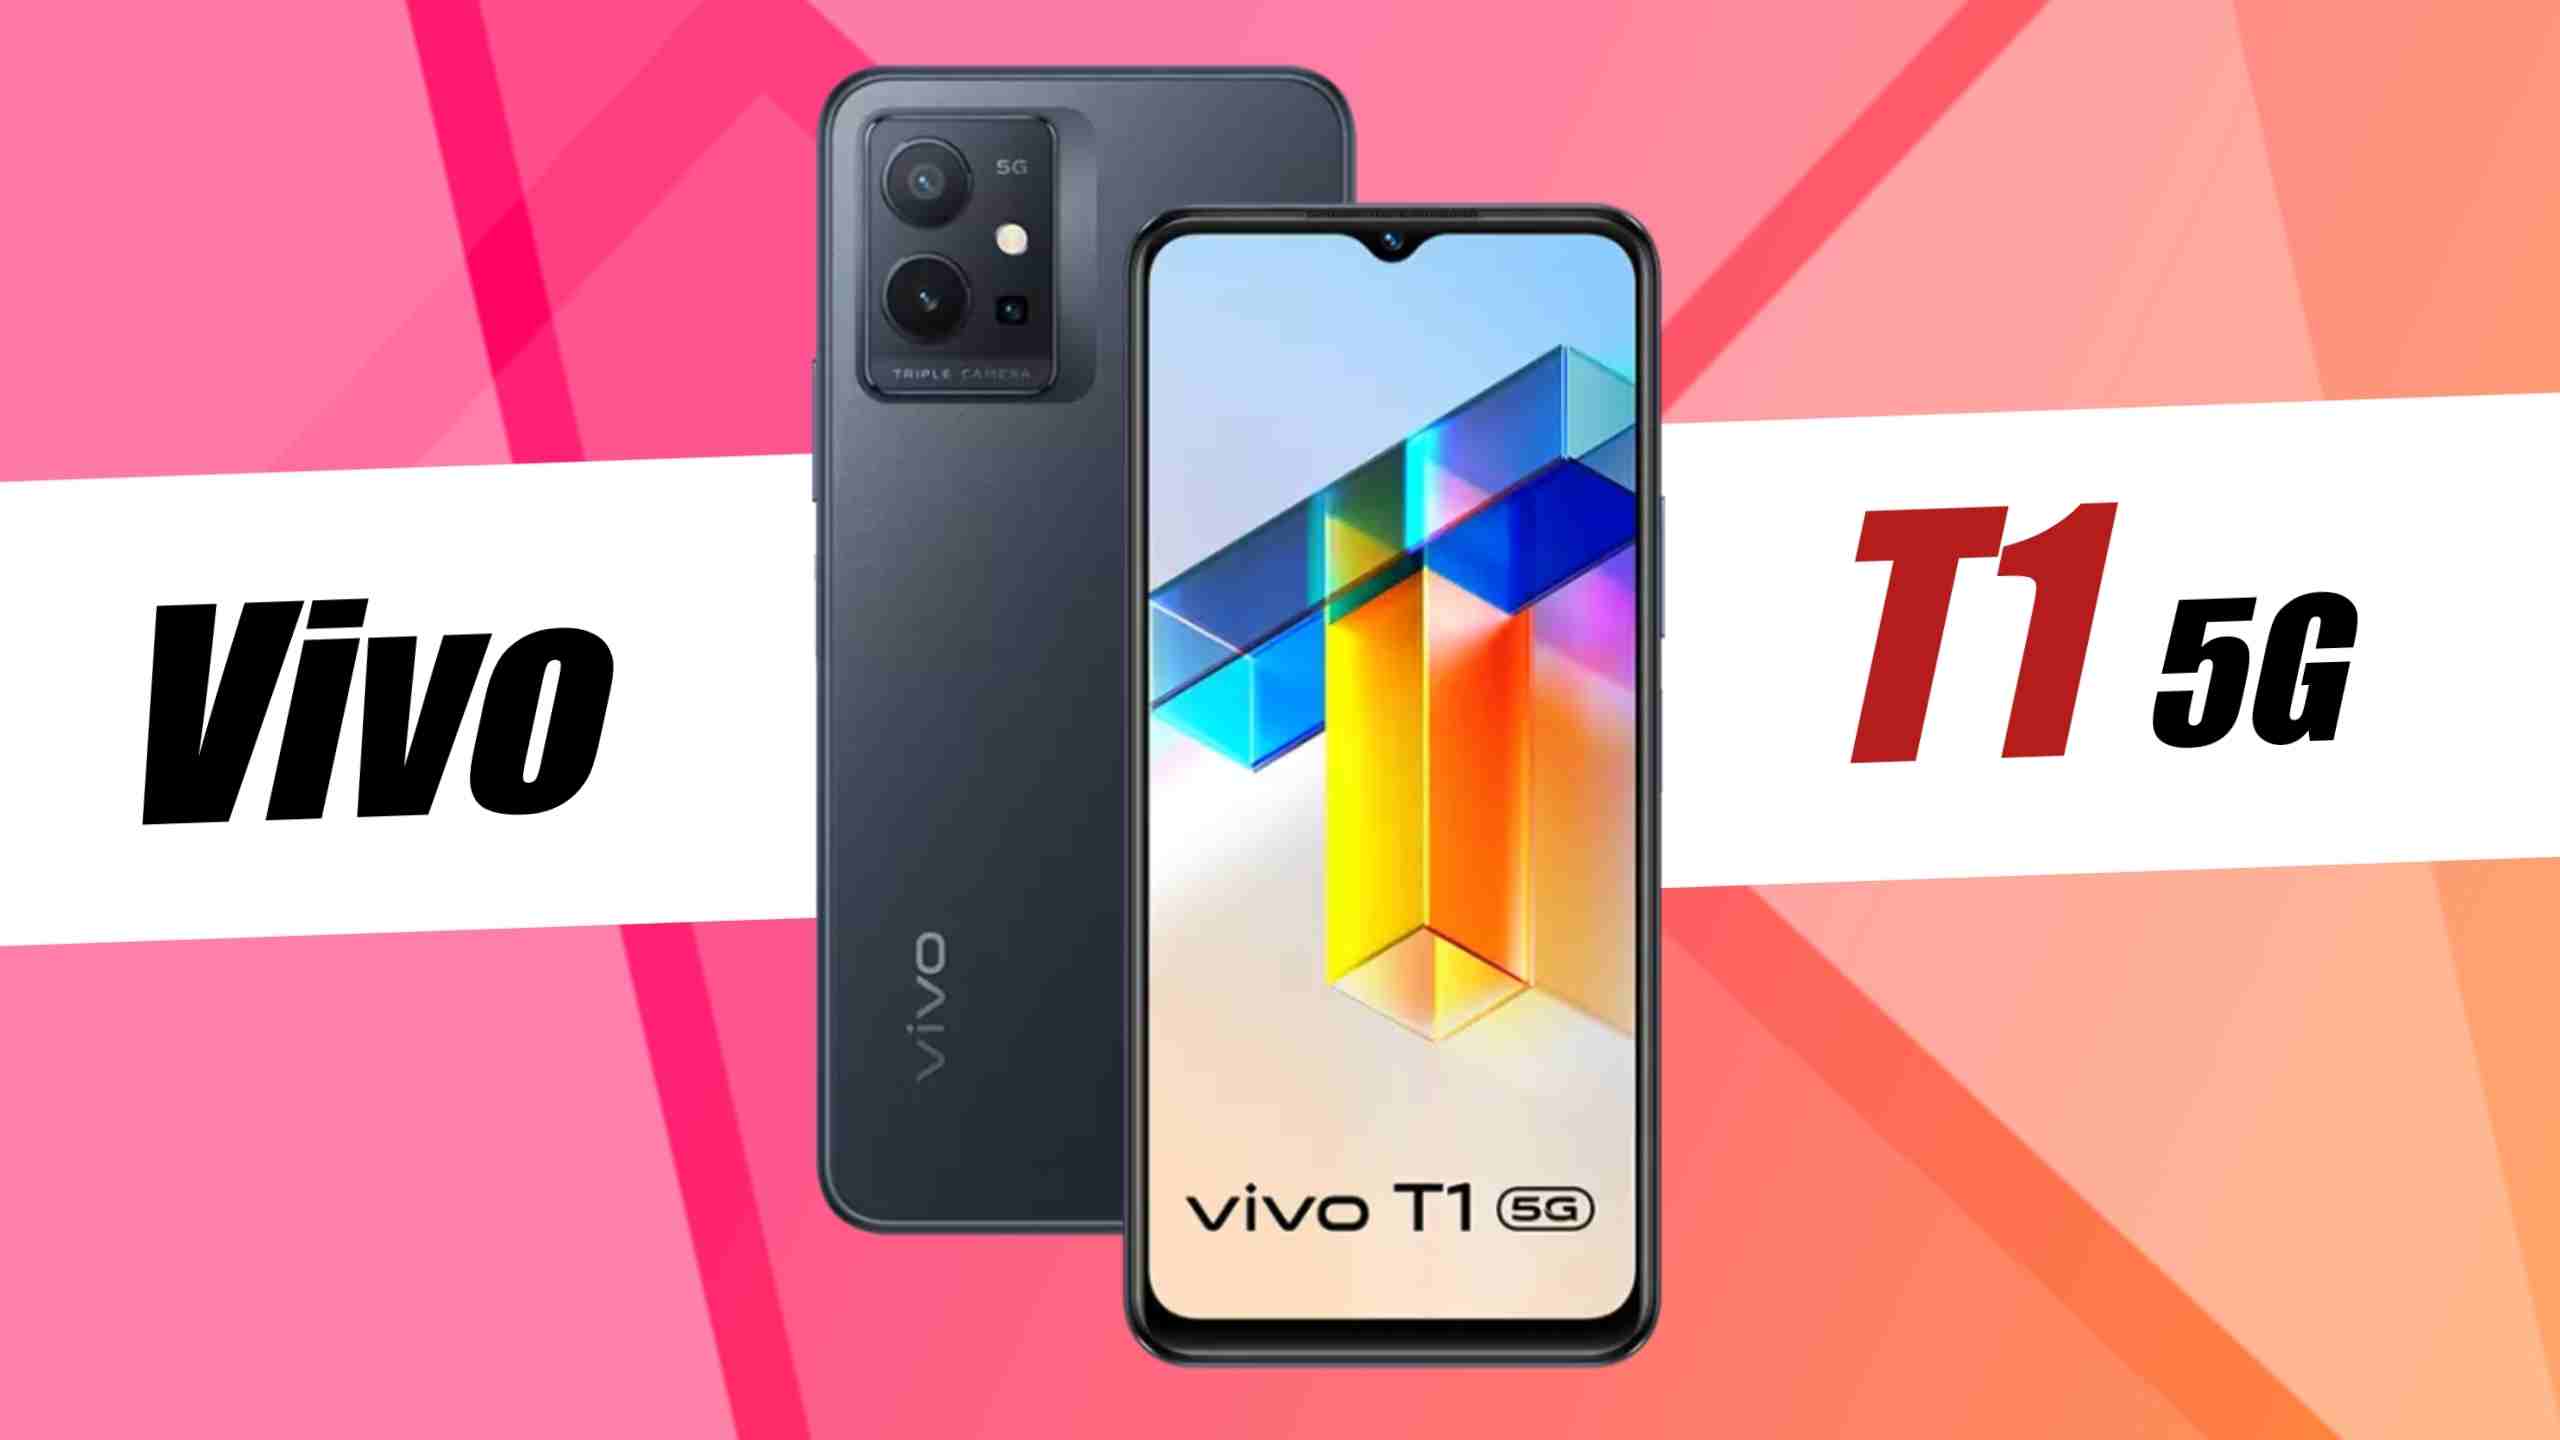 Vivo T1 5G with Snapdragon 695, 50MP triple rear camera launched in India: Price, Specifications